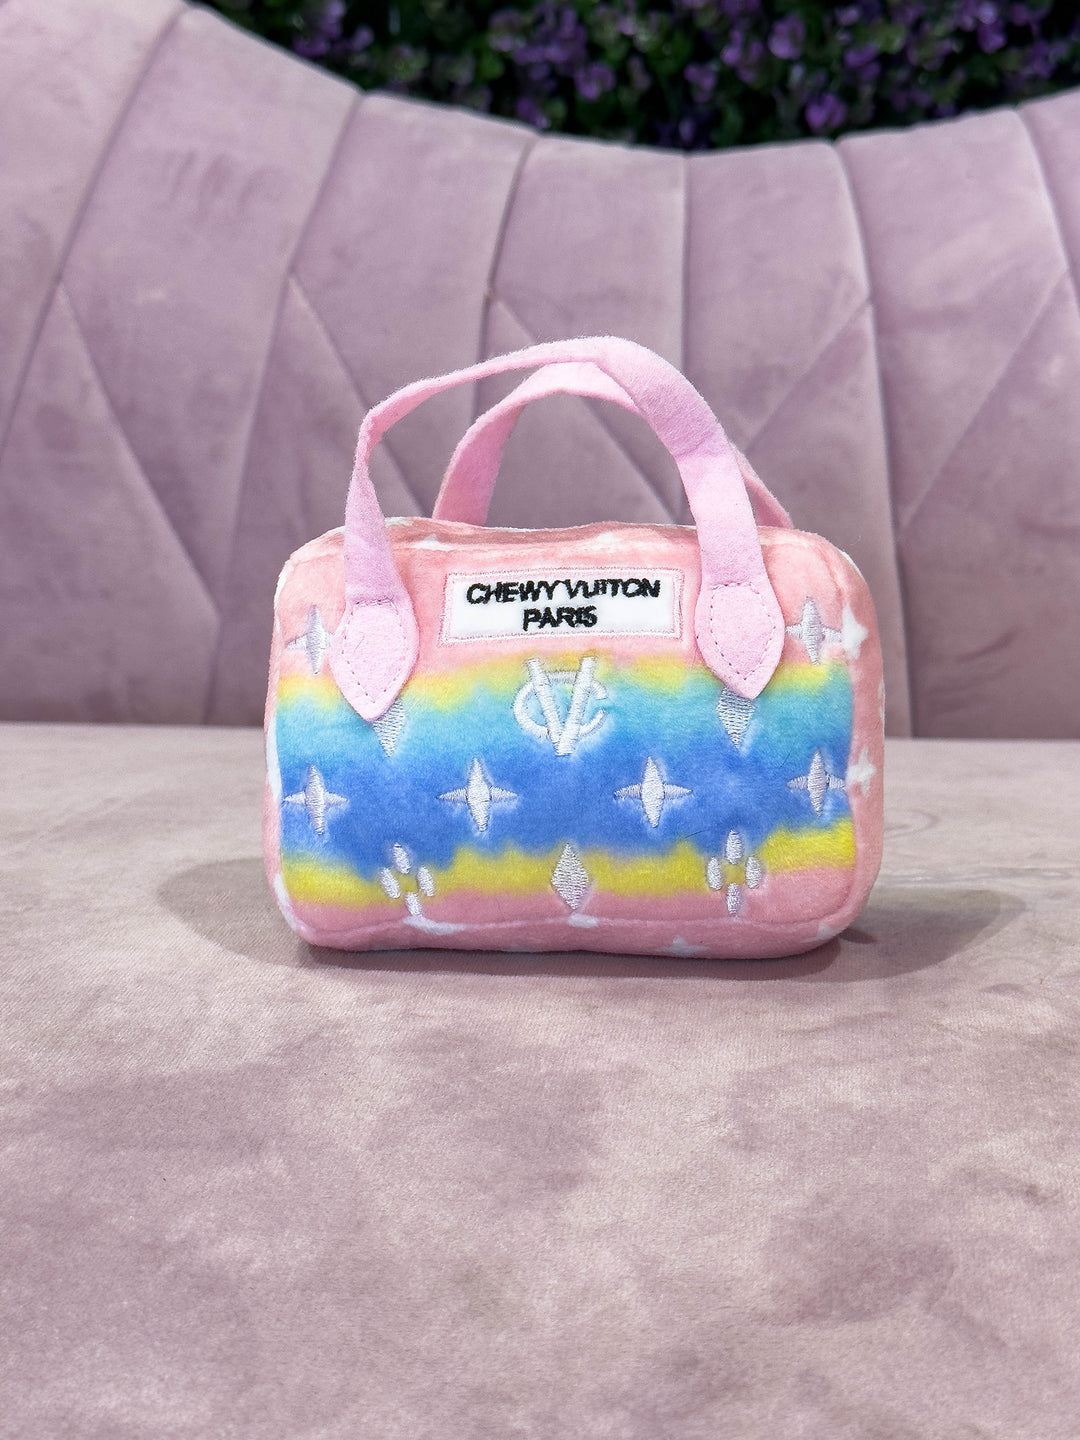 Pink ombre chewy vuitton handbag